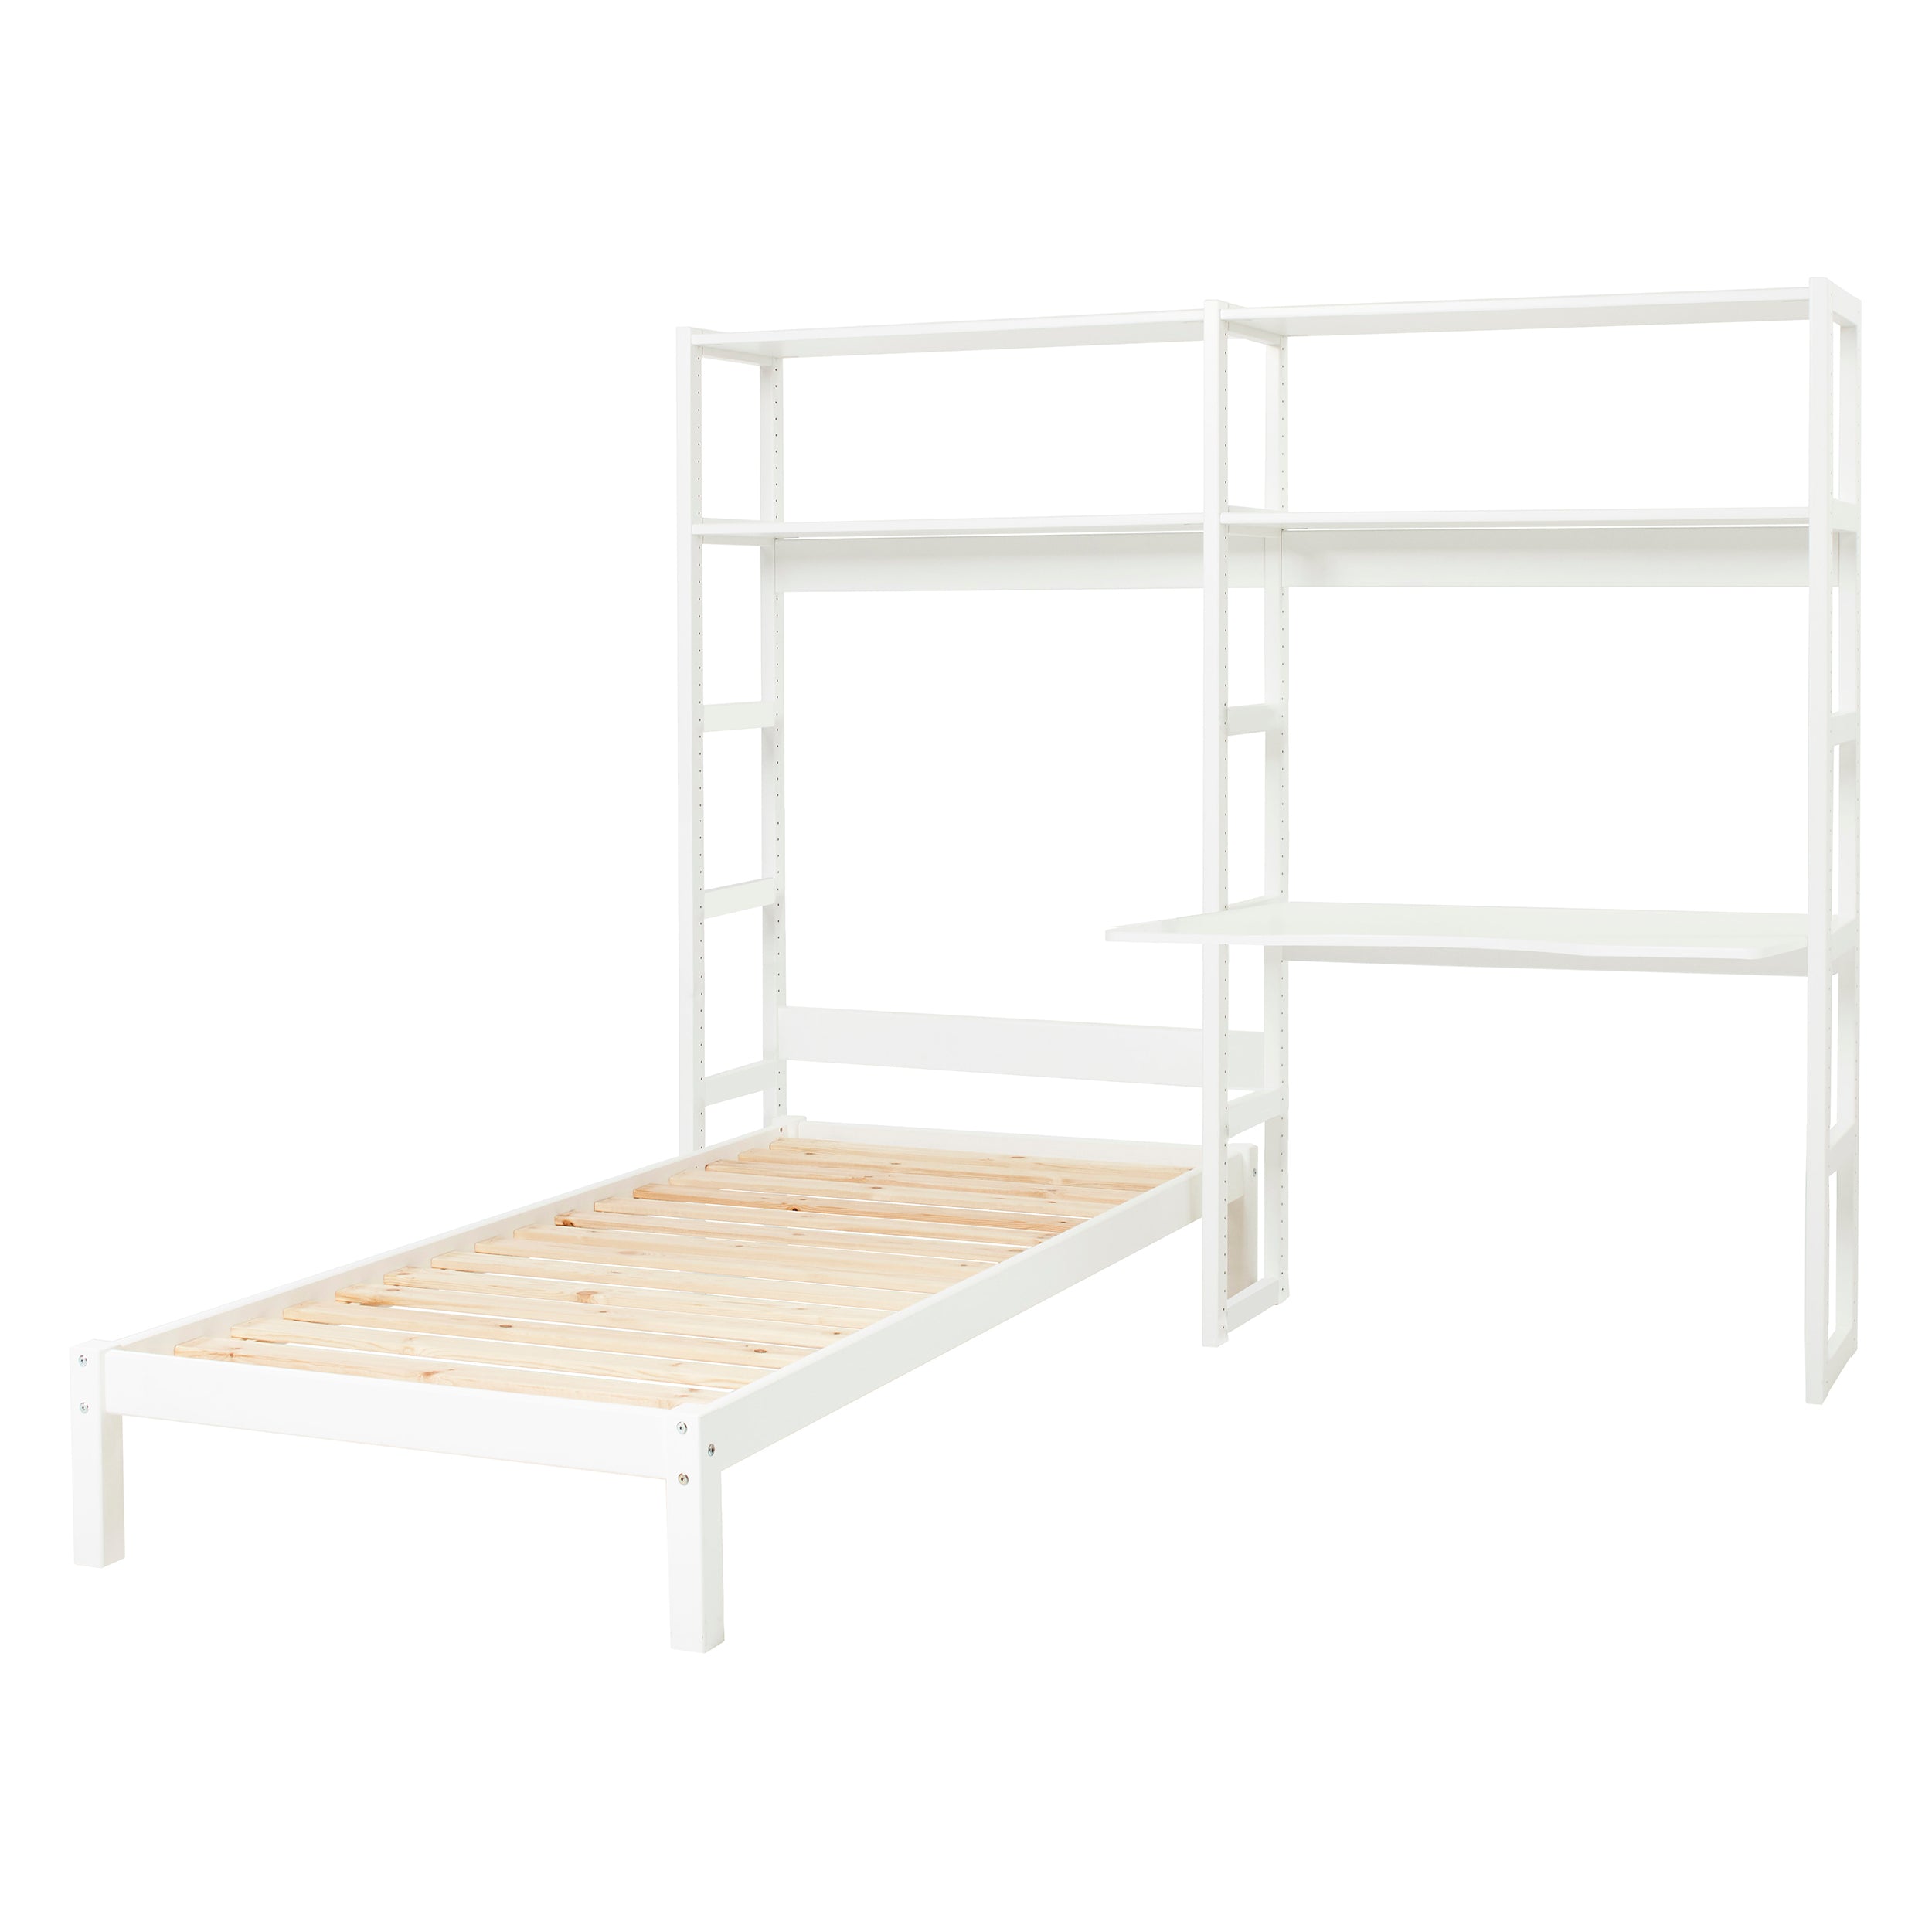 Hoppekids STOREY shelf with 2 sections, 4 shelves, bed in 70x160 cm, and writing desk in 80 cm, White